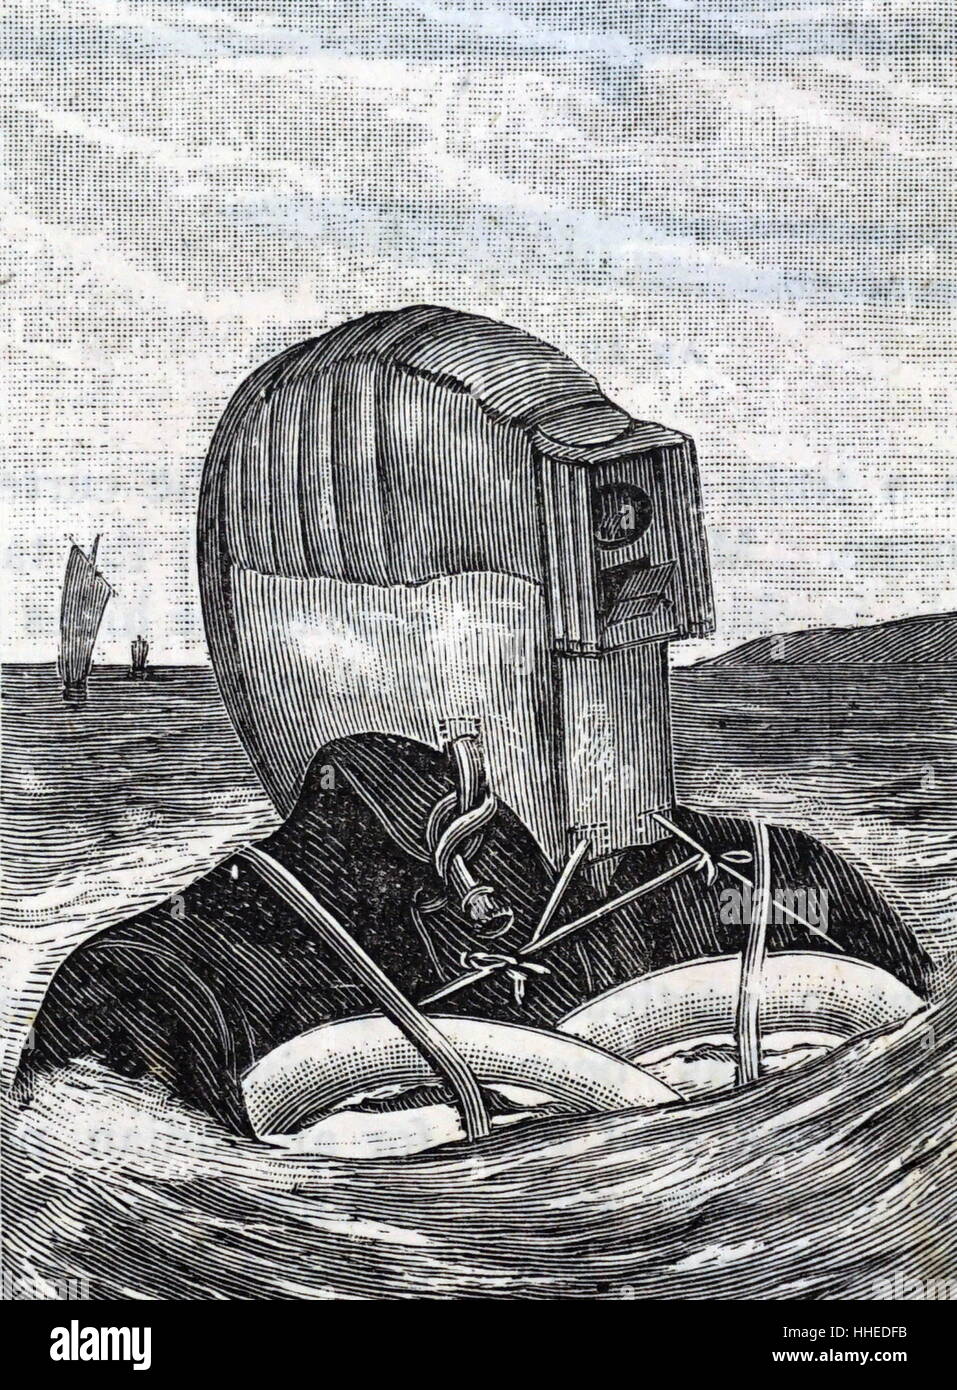 Engraving of William Wilkins' new life-preserver consisting of an atmospheric helmet and belt, known as the Lifebelt. Dated 19th Century Stock Photo